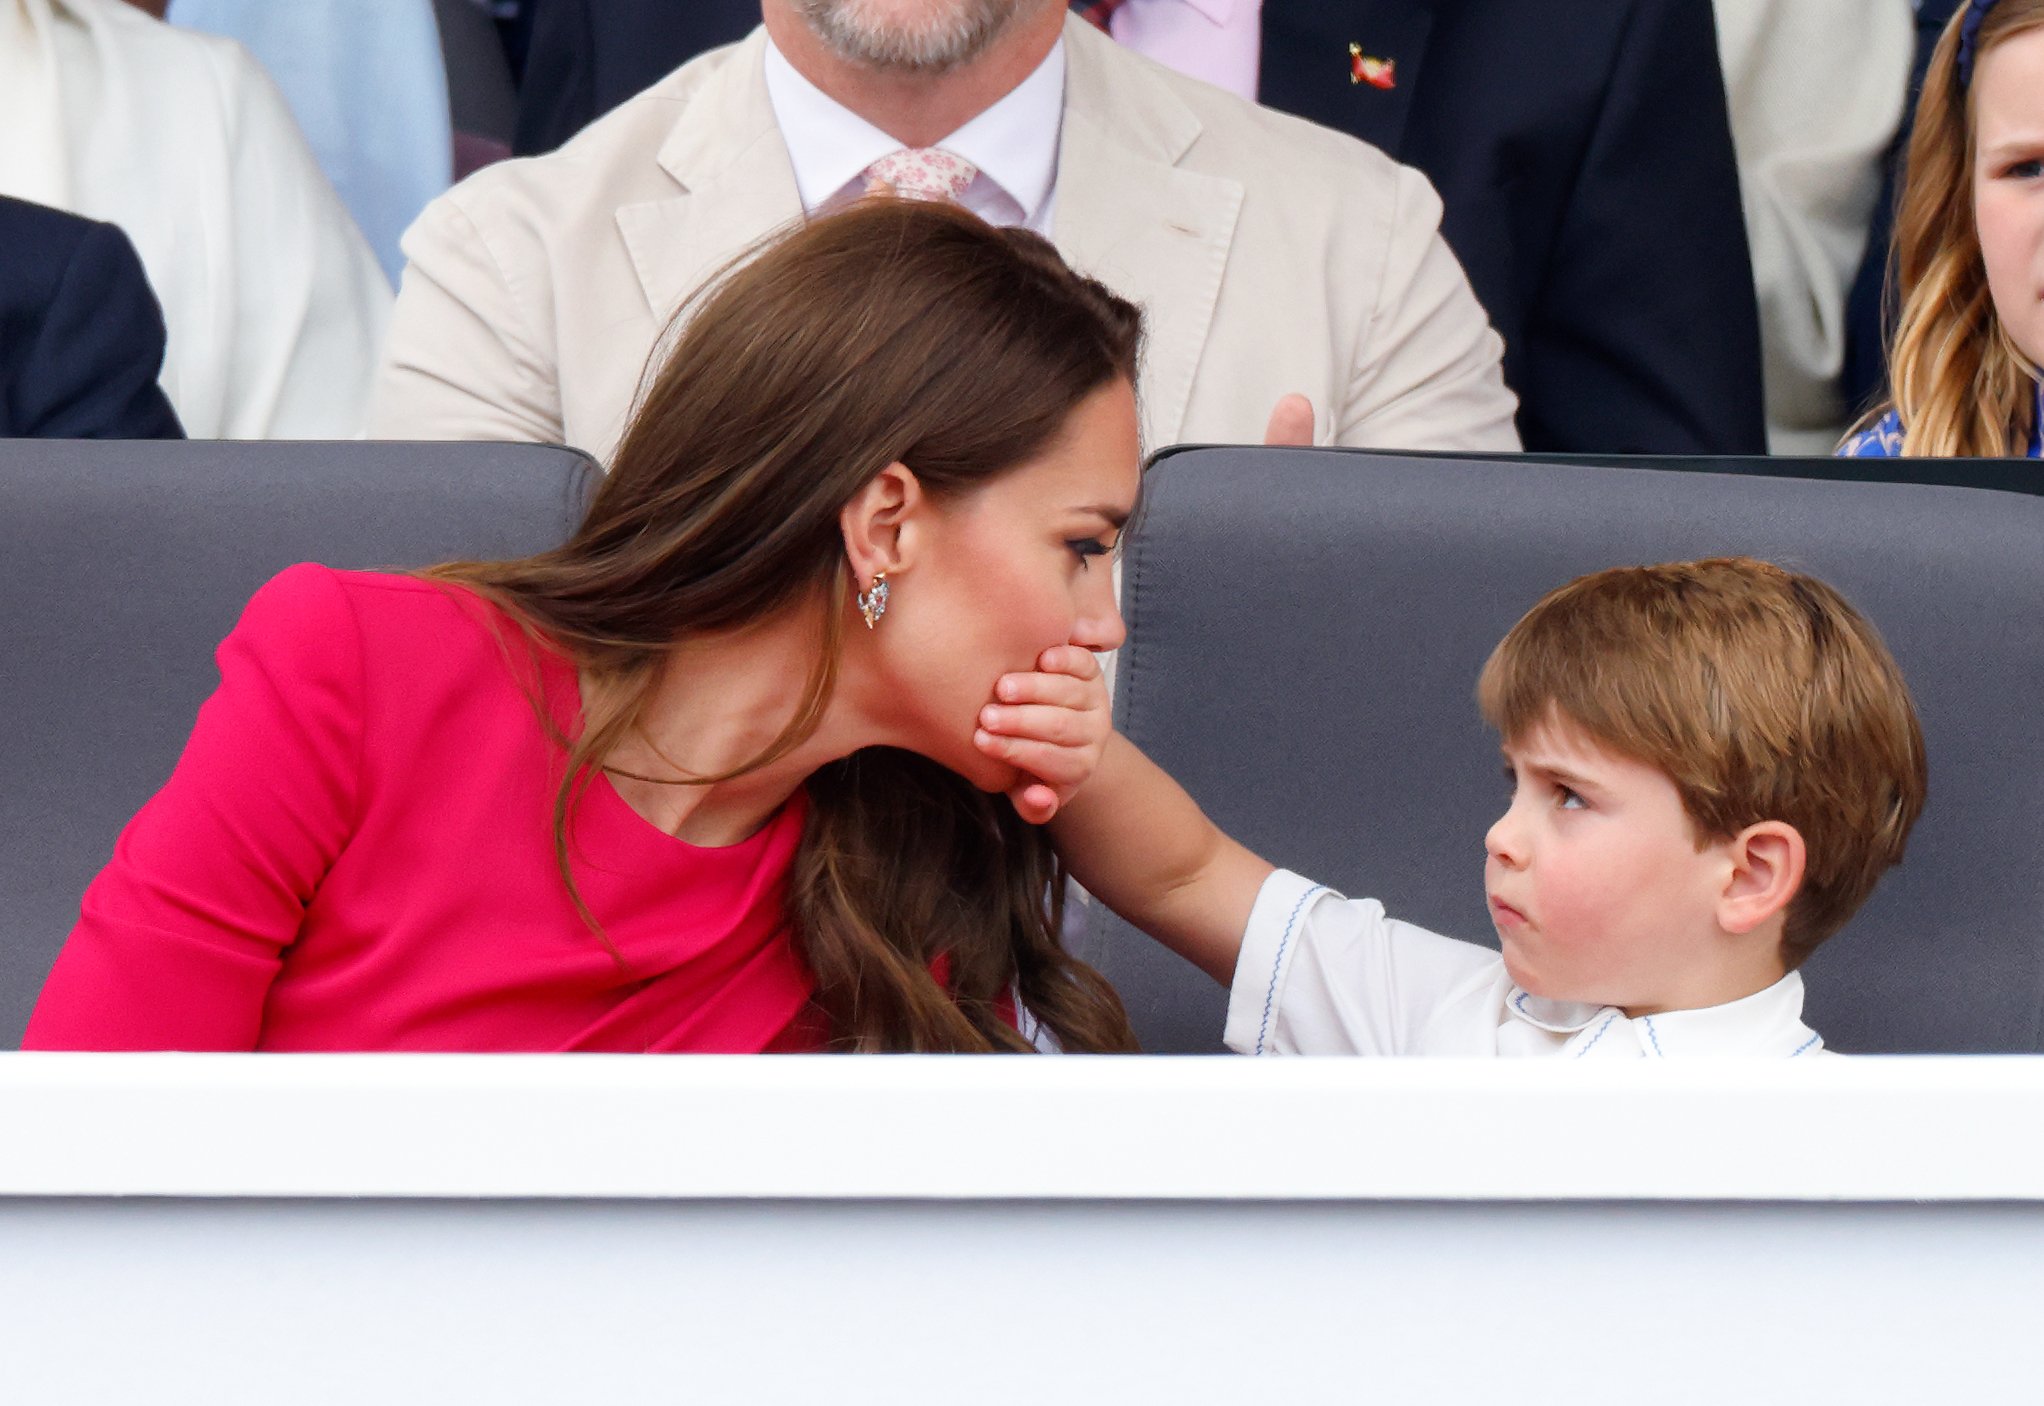 Prince Louis of Cambridge covers his mother Catherine, Duchess of Cambridge's mouth with his hand as they attend the Platinum Pageant on The Mall on June 5, 2022 in London, England. | Source: Getty Images